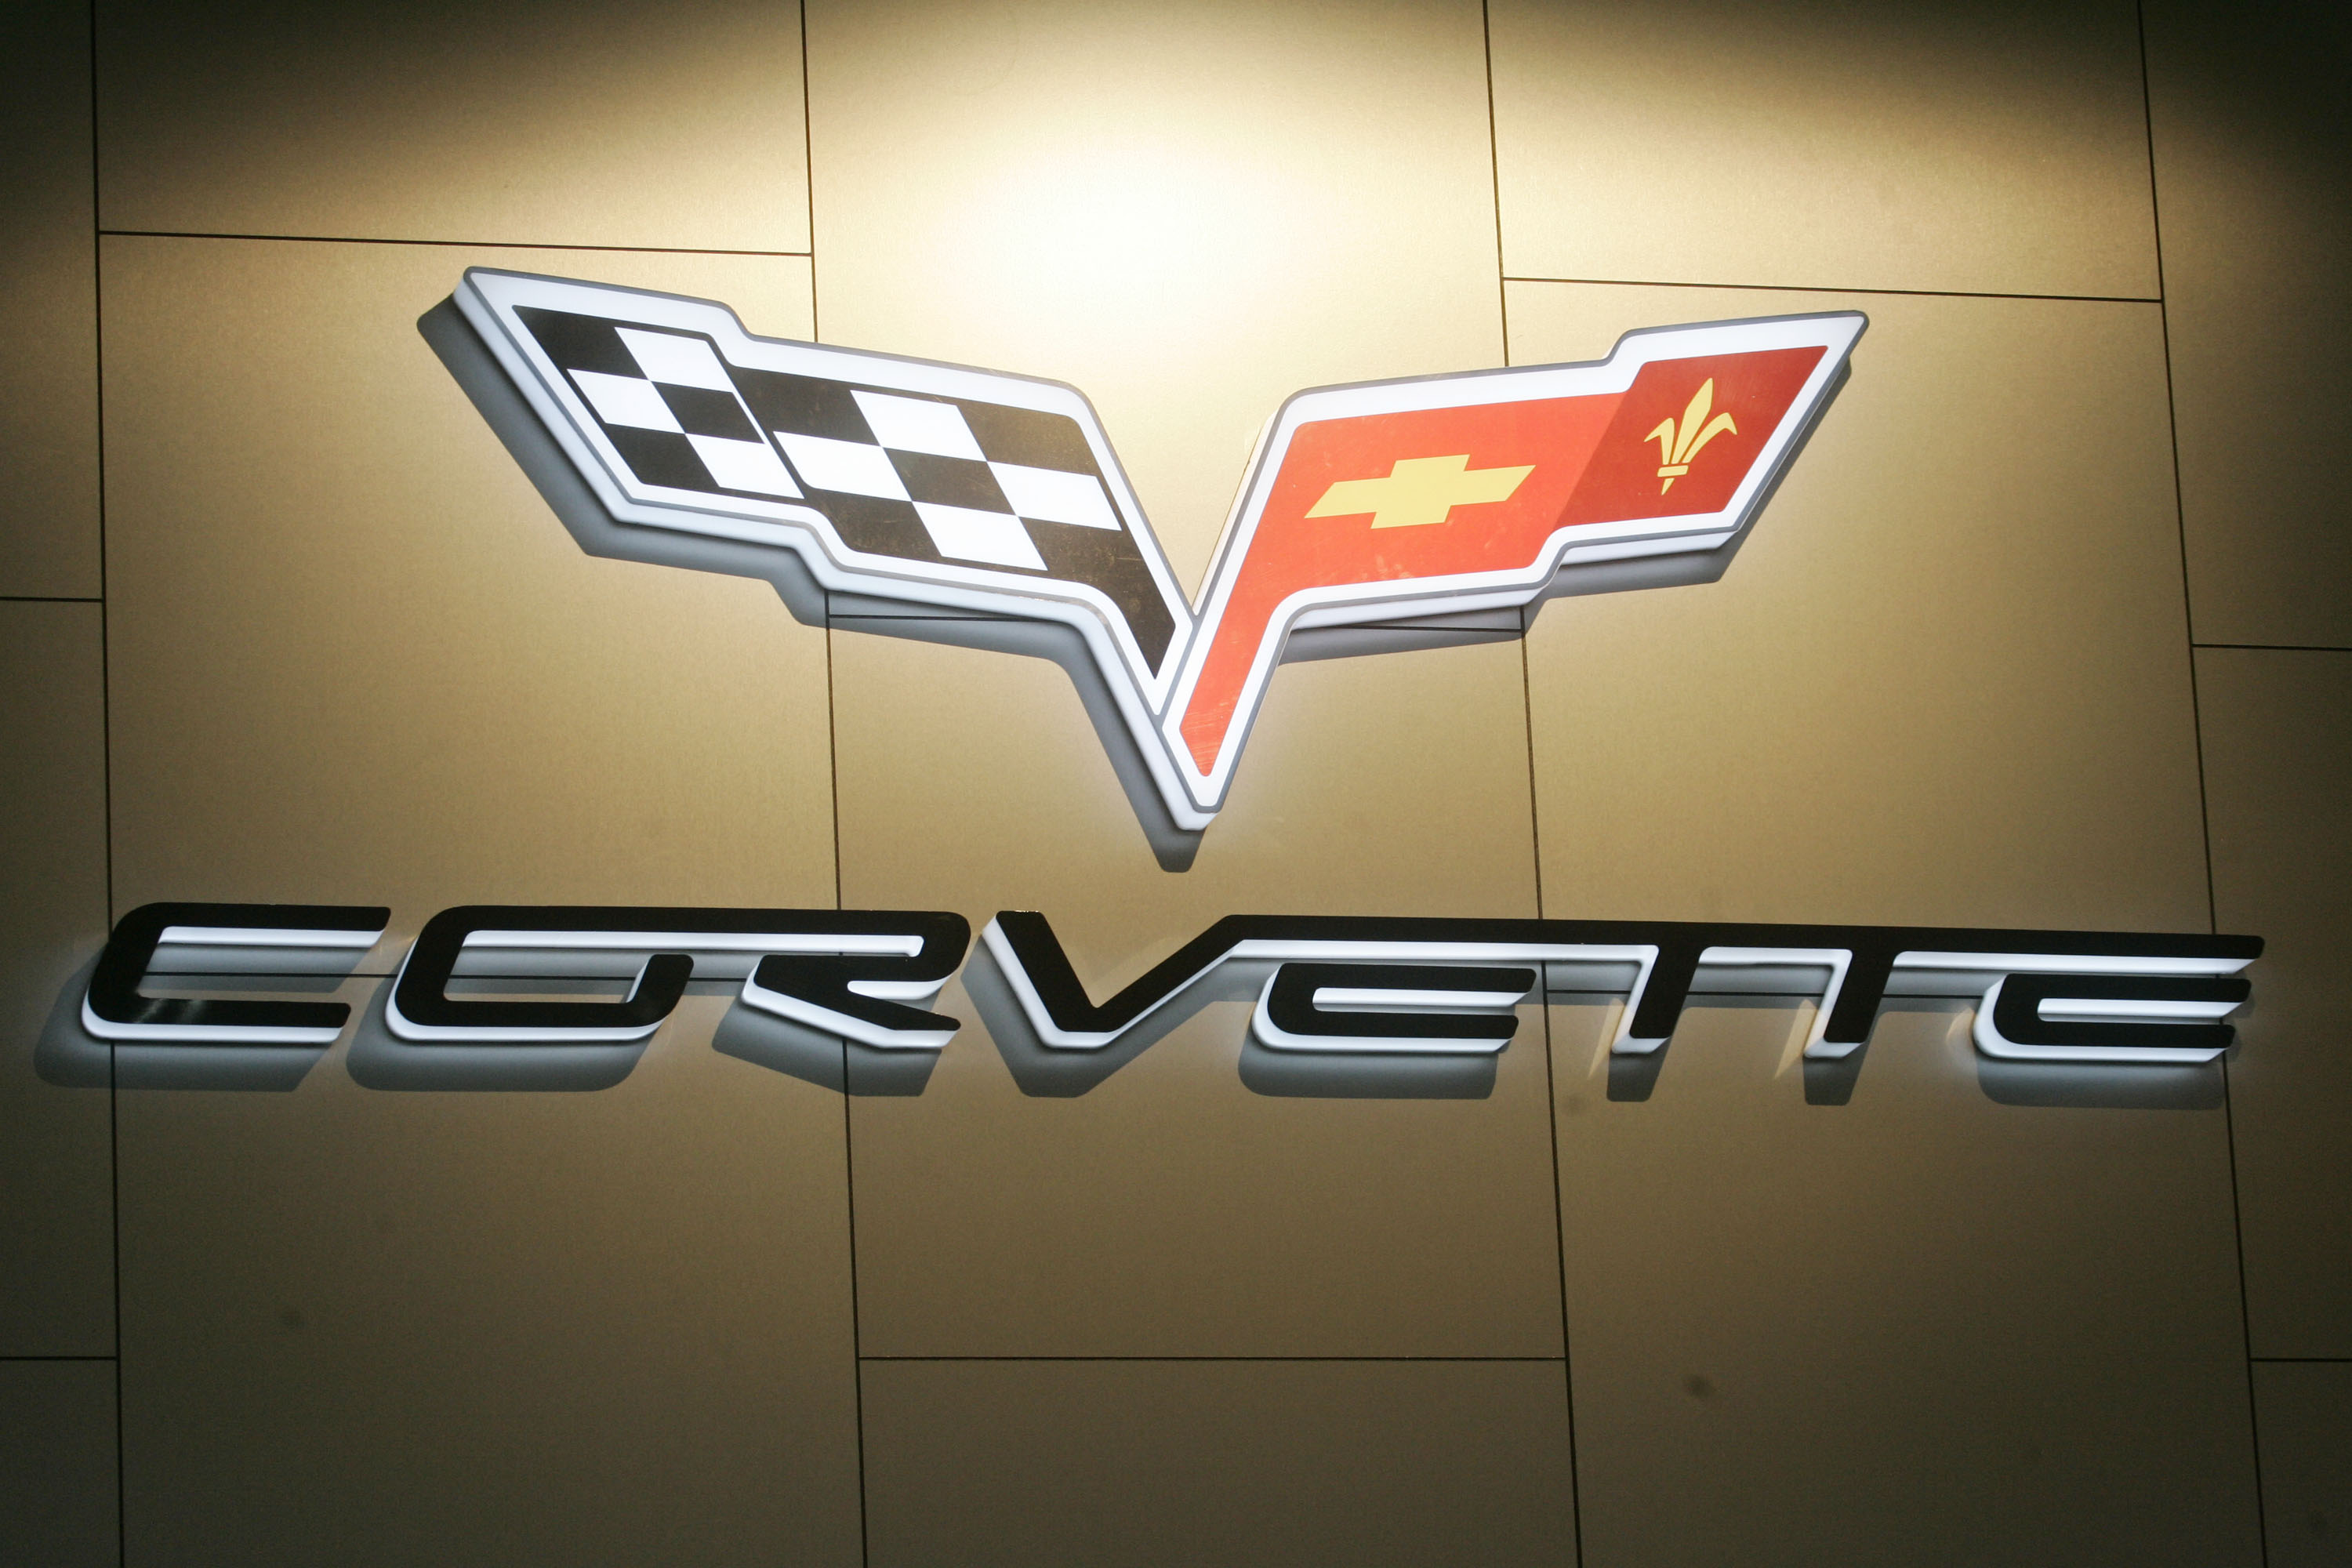 The Corvette logo was into a wall hanging and is spotlighted from above